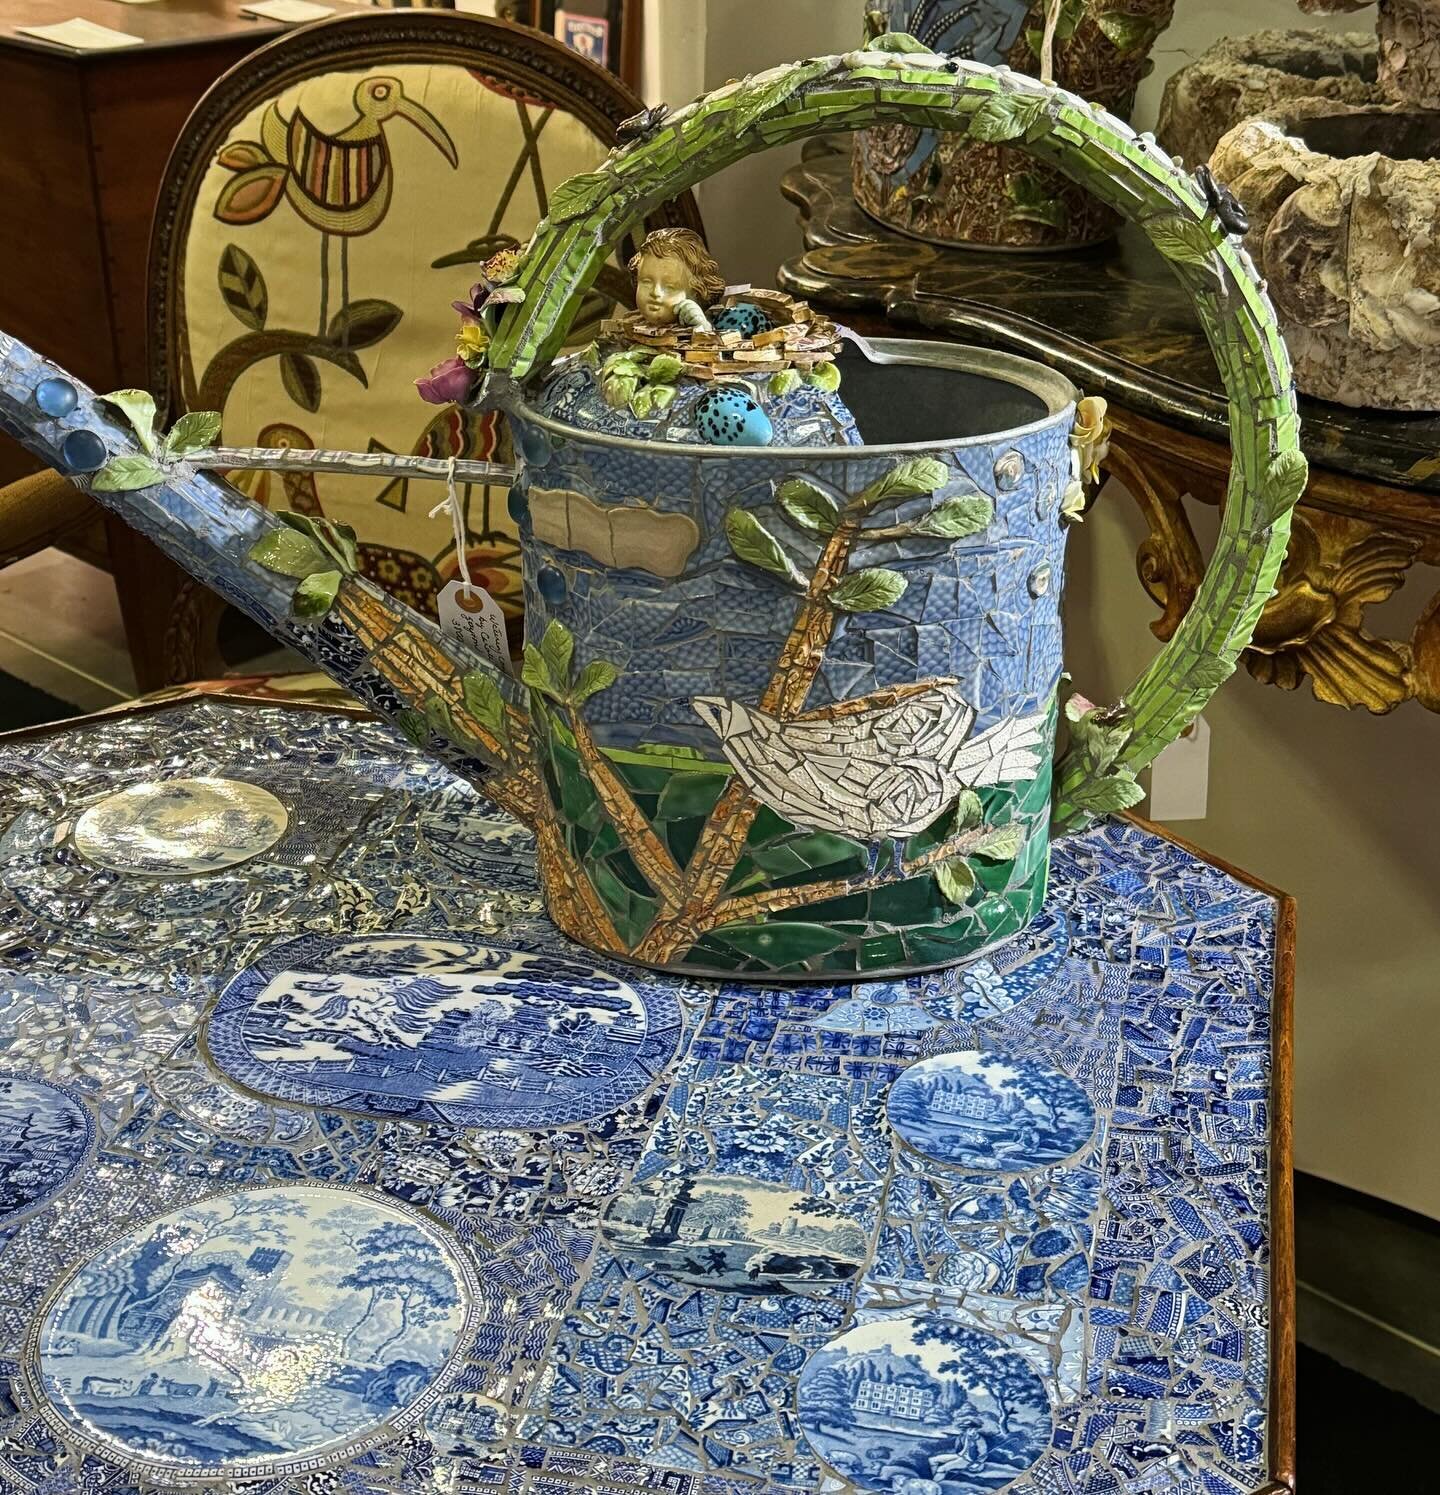 &ldquo;Pique&rdquo; is similar to mosaic using broken plates arranged in patterns and designs. These watering cans and furniture pieces are amazing!! 
I&rsquo;ll come back and tag the dealer shortly&hellip;